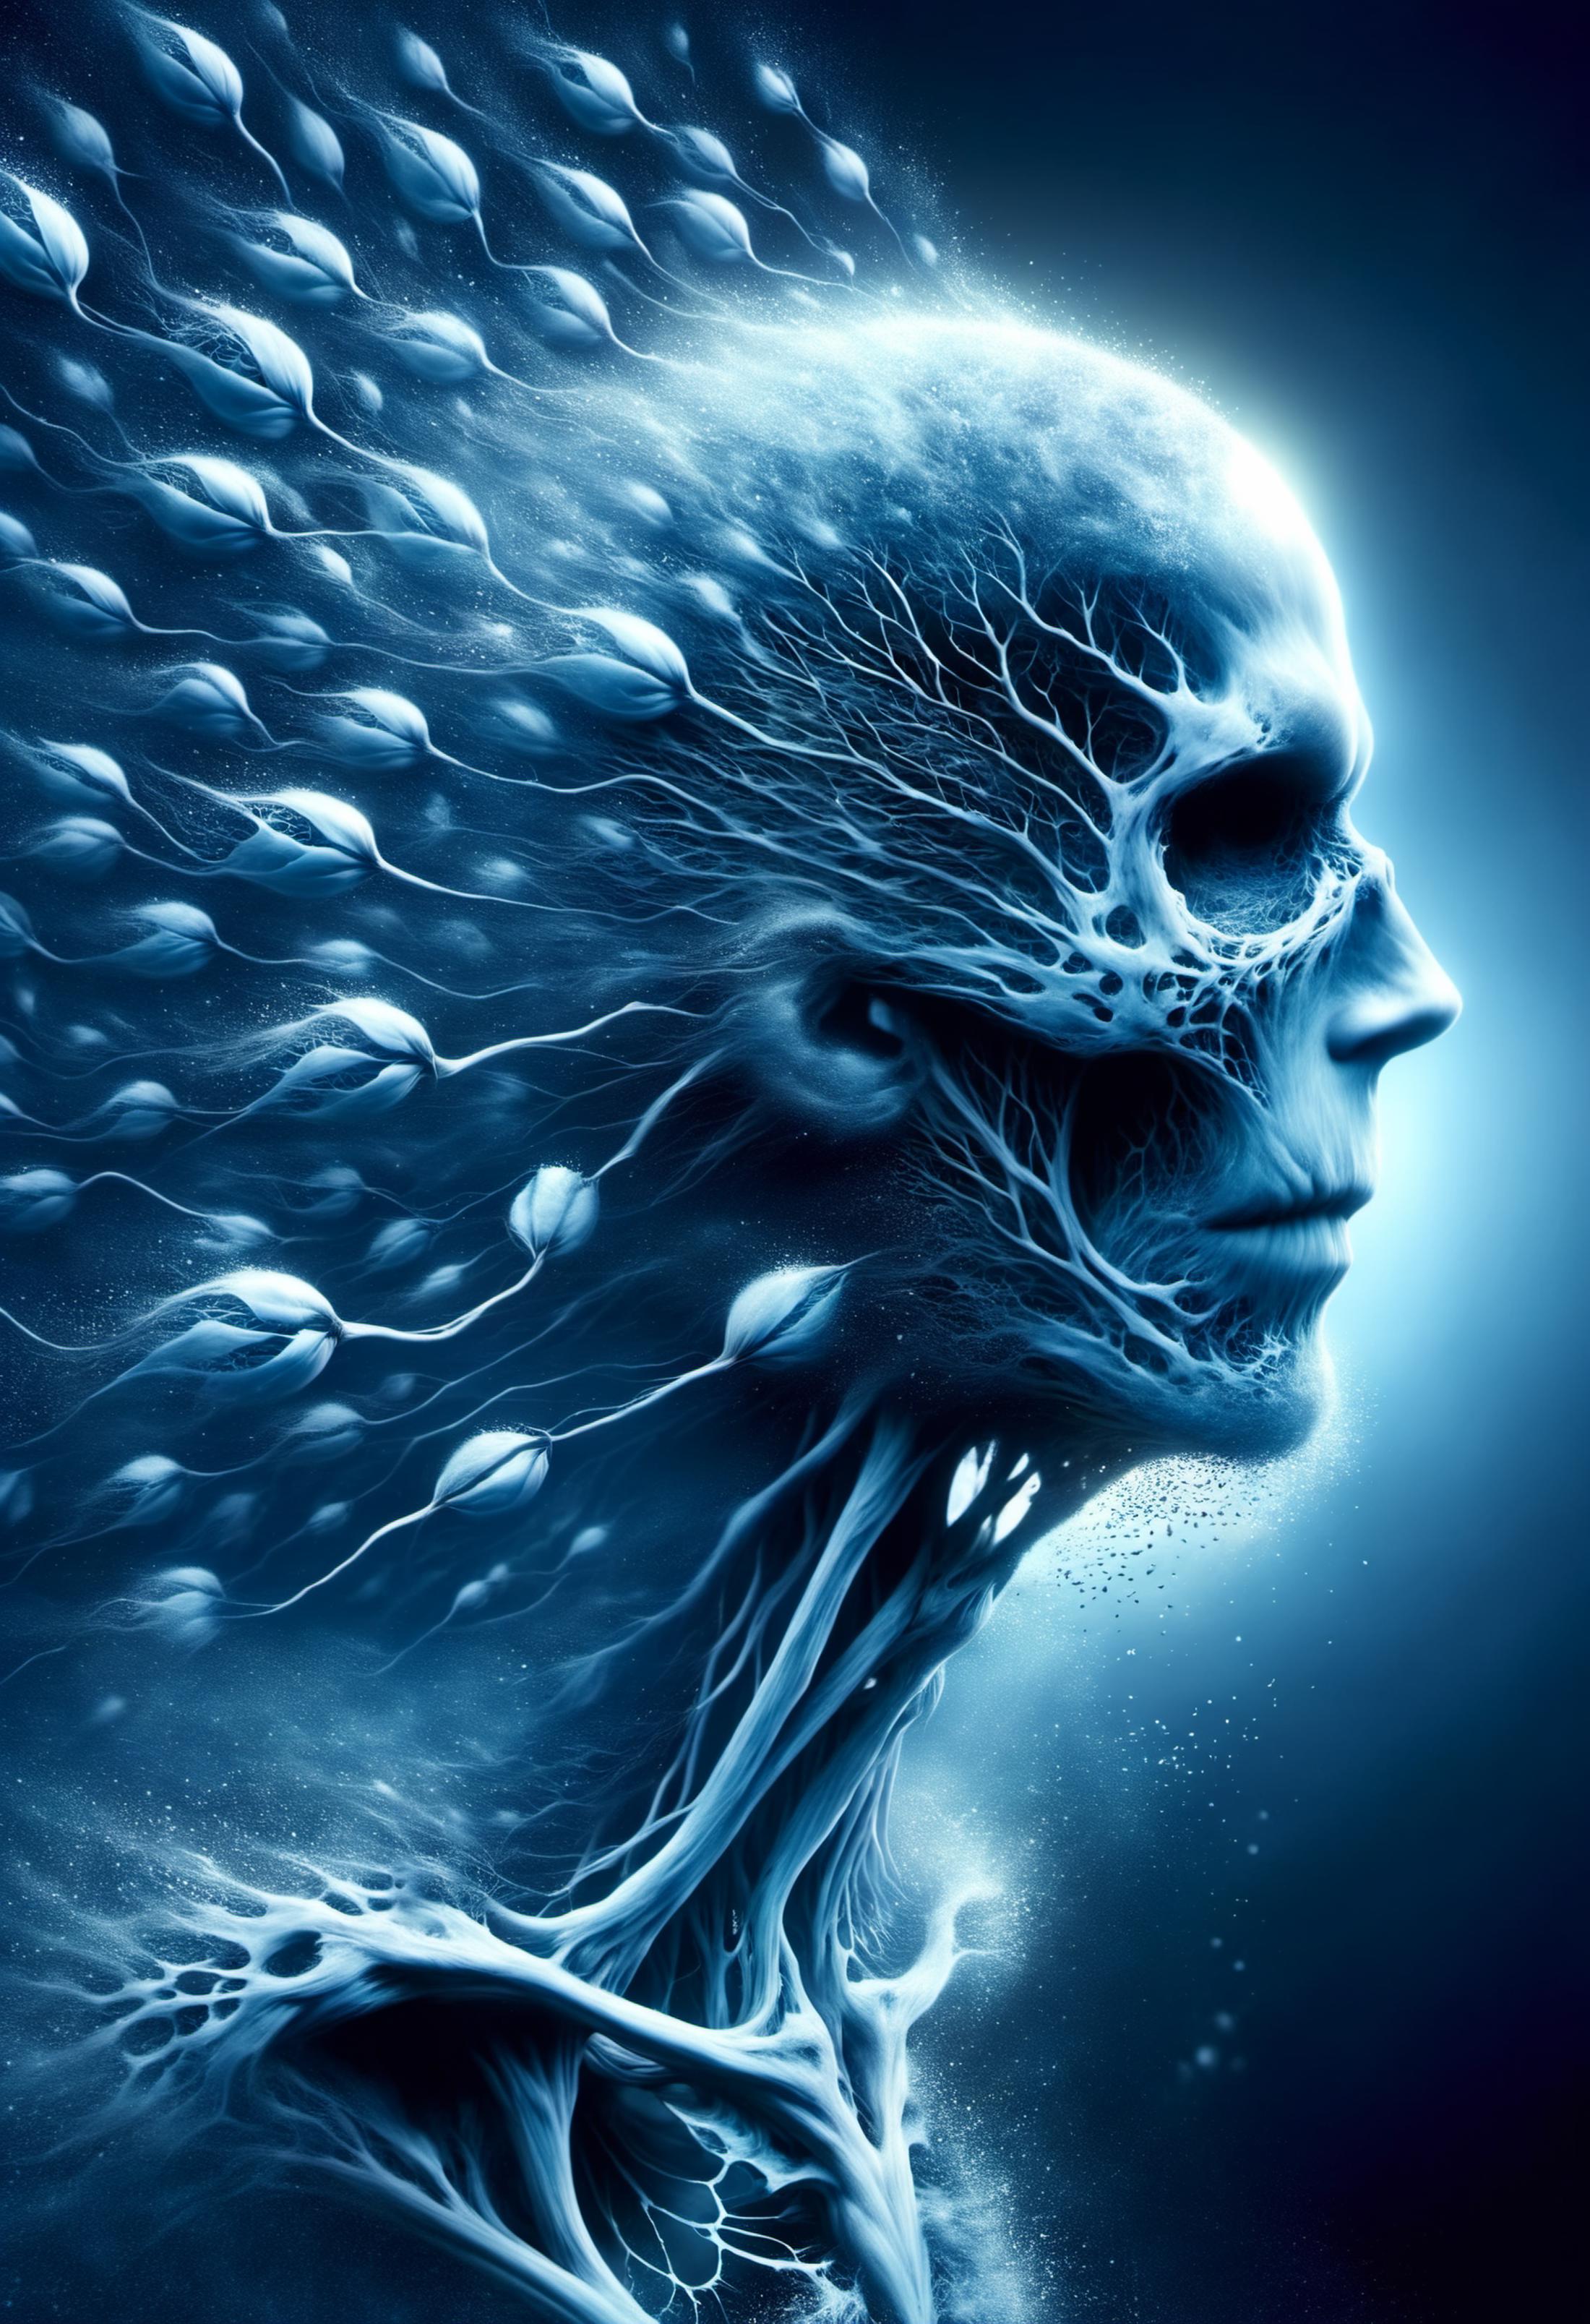 The image features a skeleton with a blue background and multiple sperm-like objects attached to it. The skeleton's head is prominently displayed, and the image has a surreal, artistic quality. The sperm-like objects are scattered throughout the scene, with some located near the neck and others closer to the head. The overall effect is a striking and thought-provoking visual that may evoke various interpretations from the viewer.